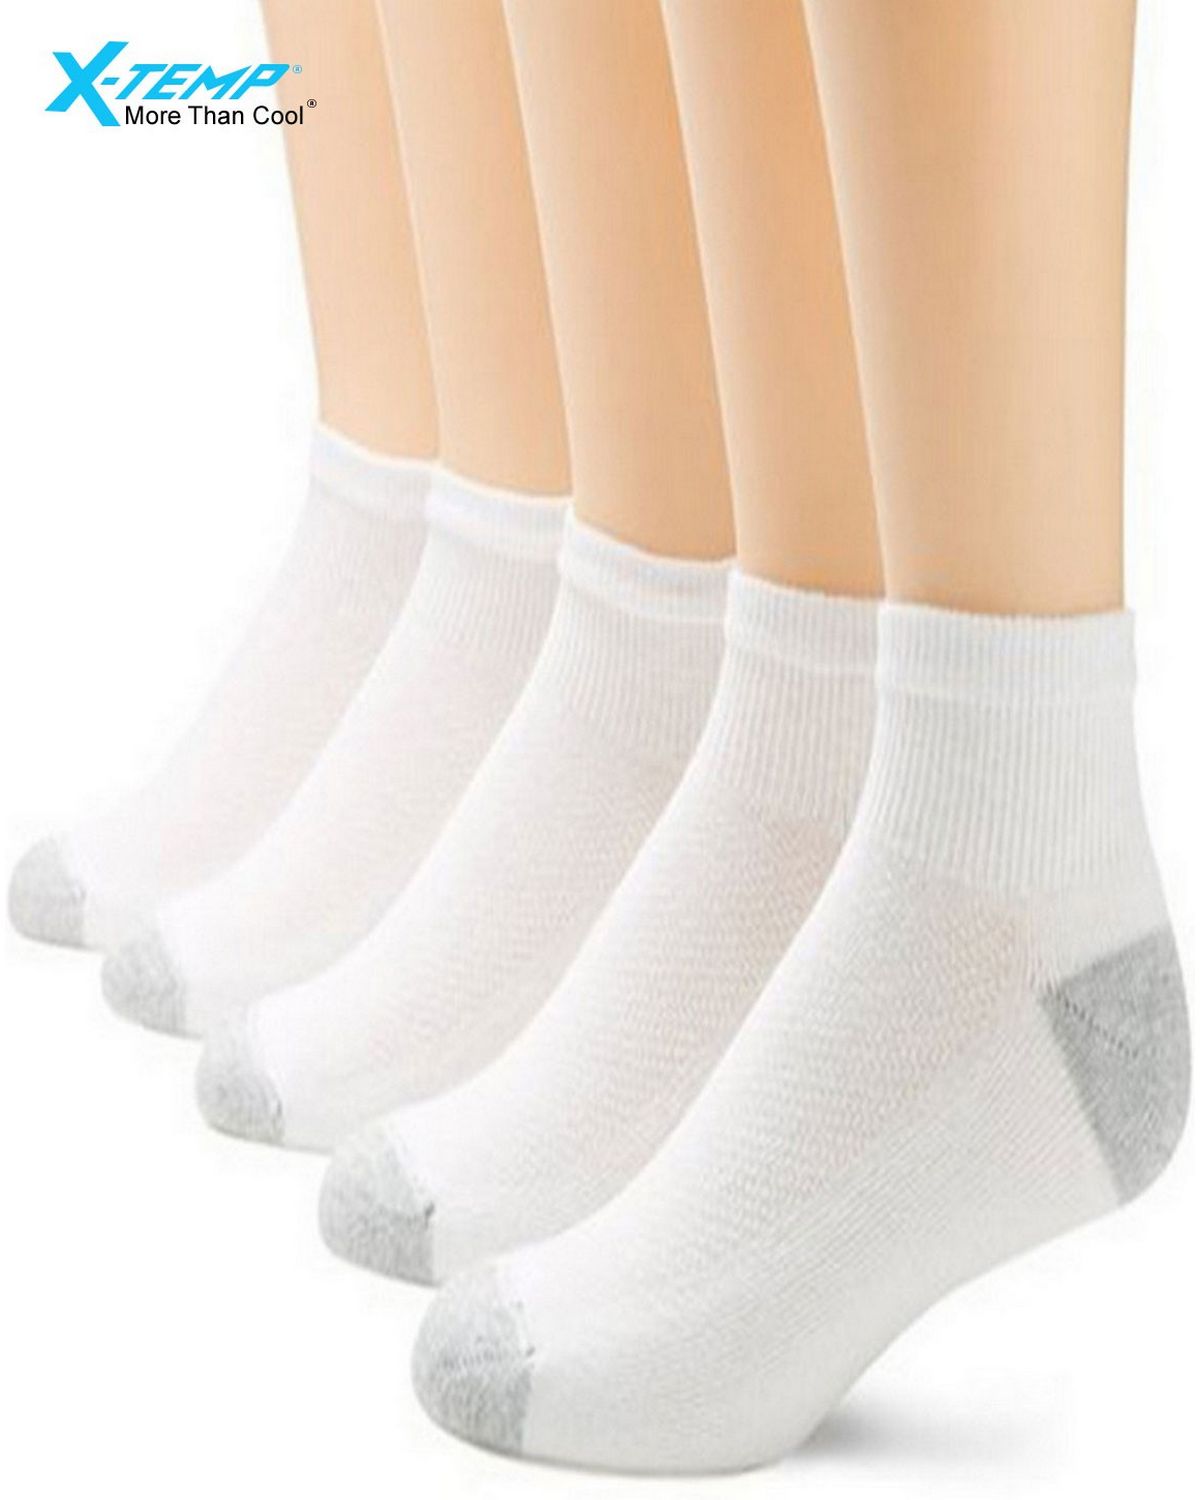 Size Chart for Hanes U15 Mens Ultimate X-Temp Ankle Socks - White